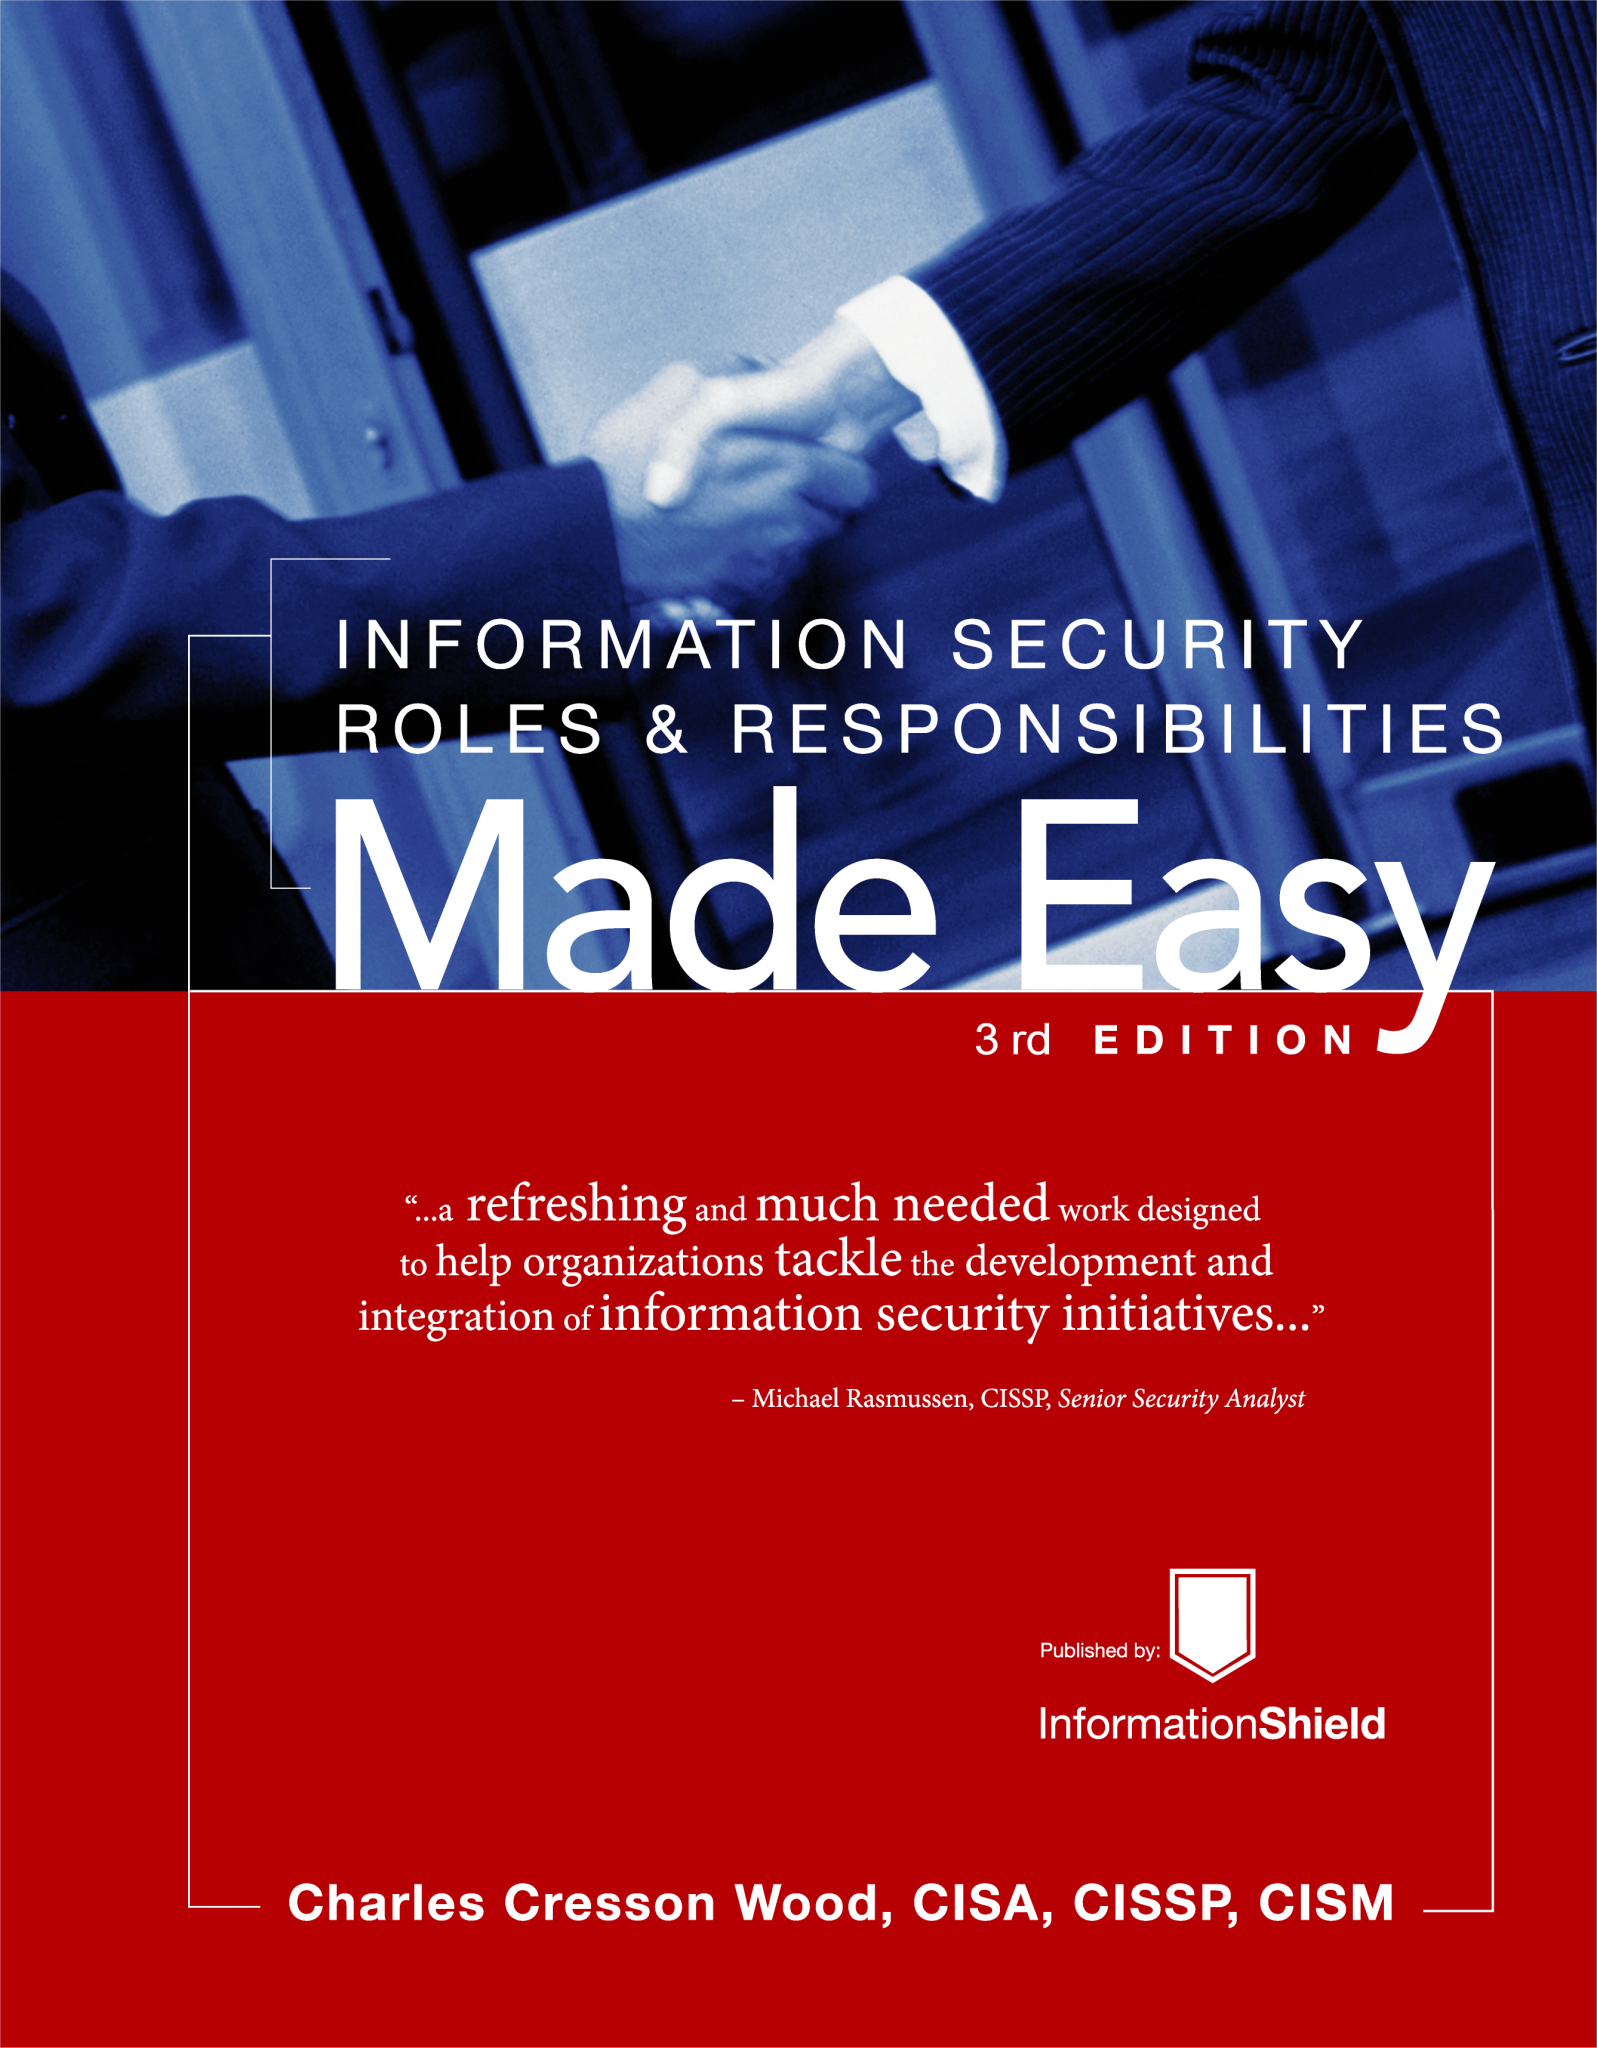 information-security-roles-responsibilities-made-easy-rothstein-publishing